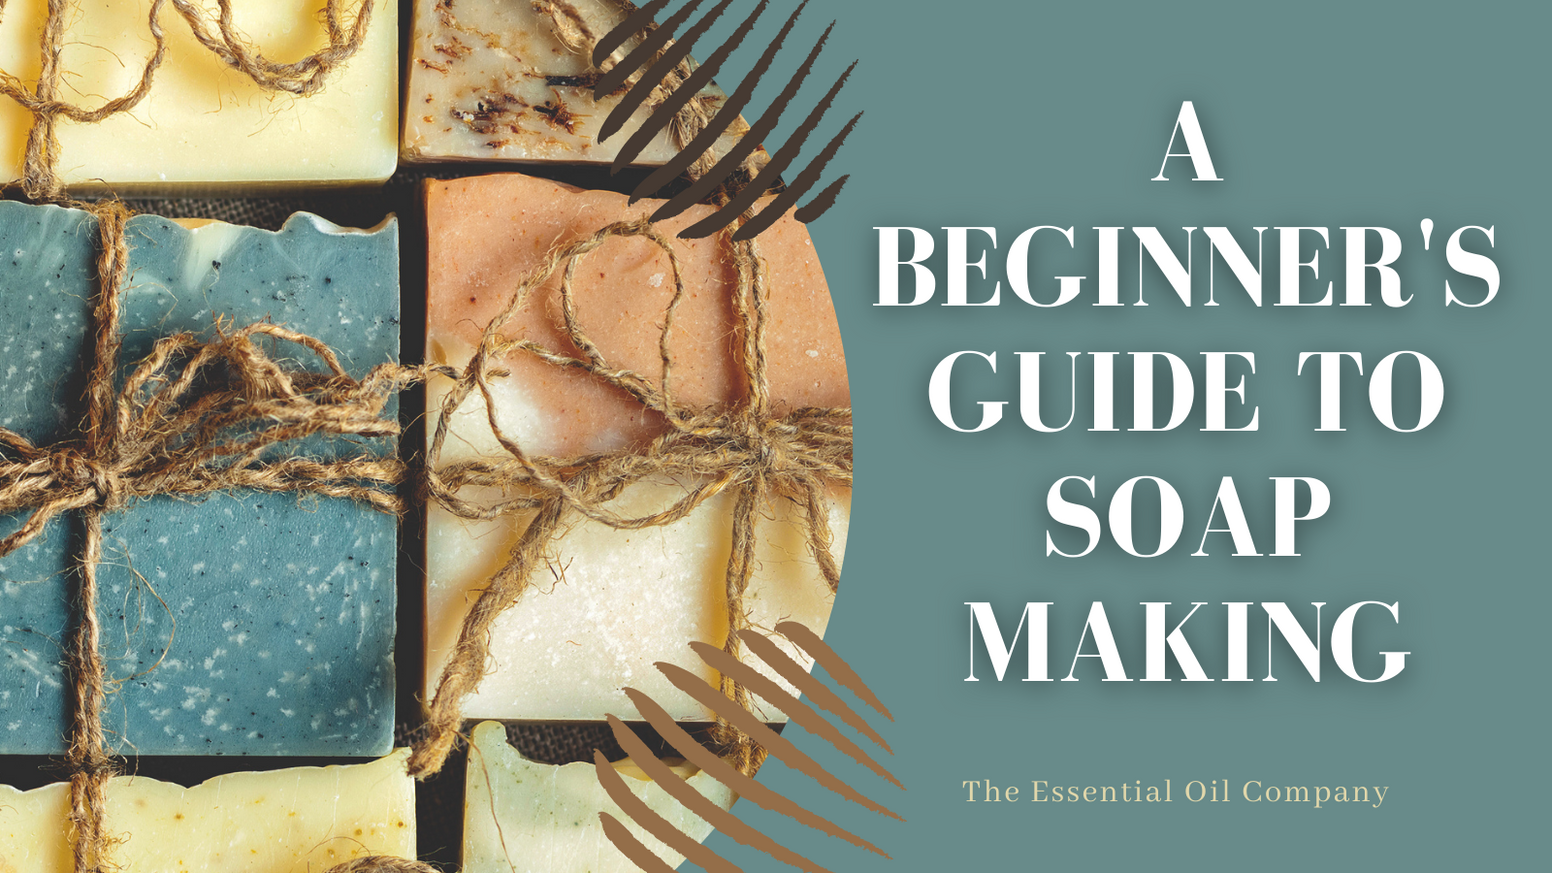 Ultimate Guide to Using an Immersion Blender for Soap Making